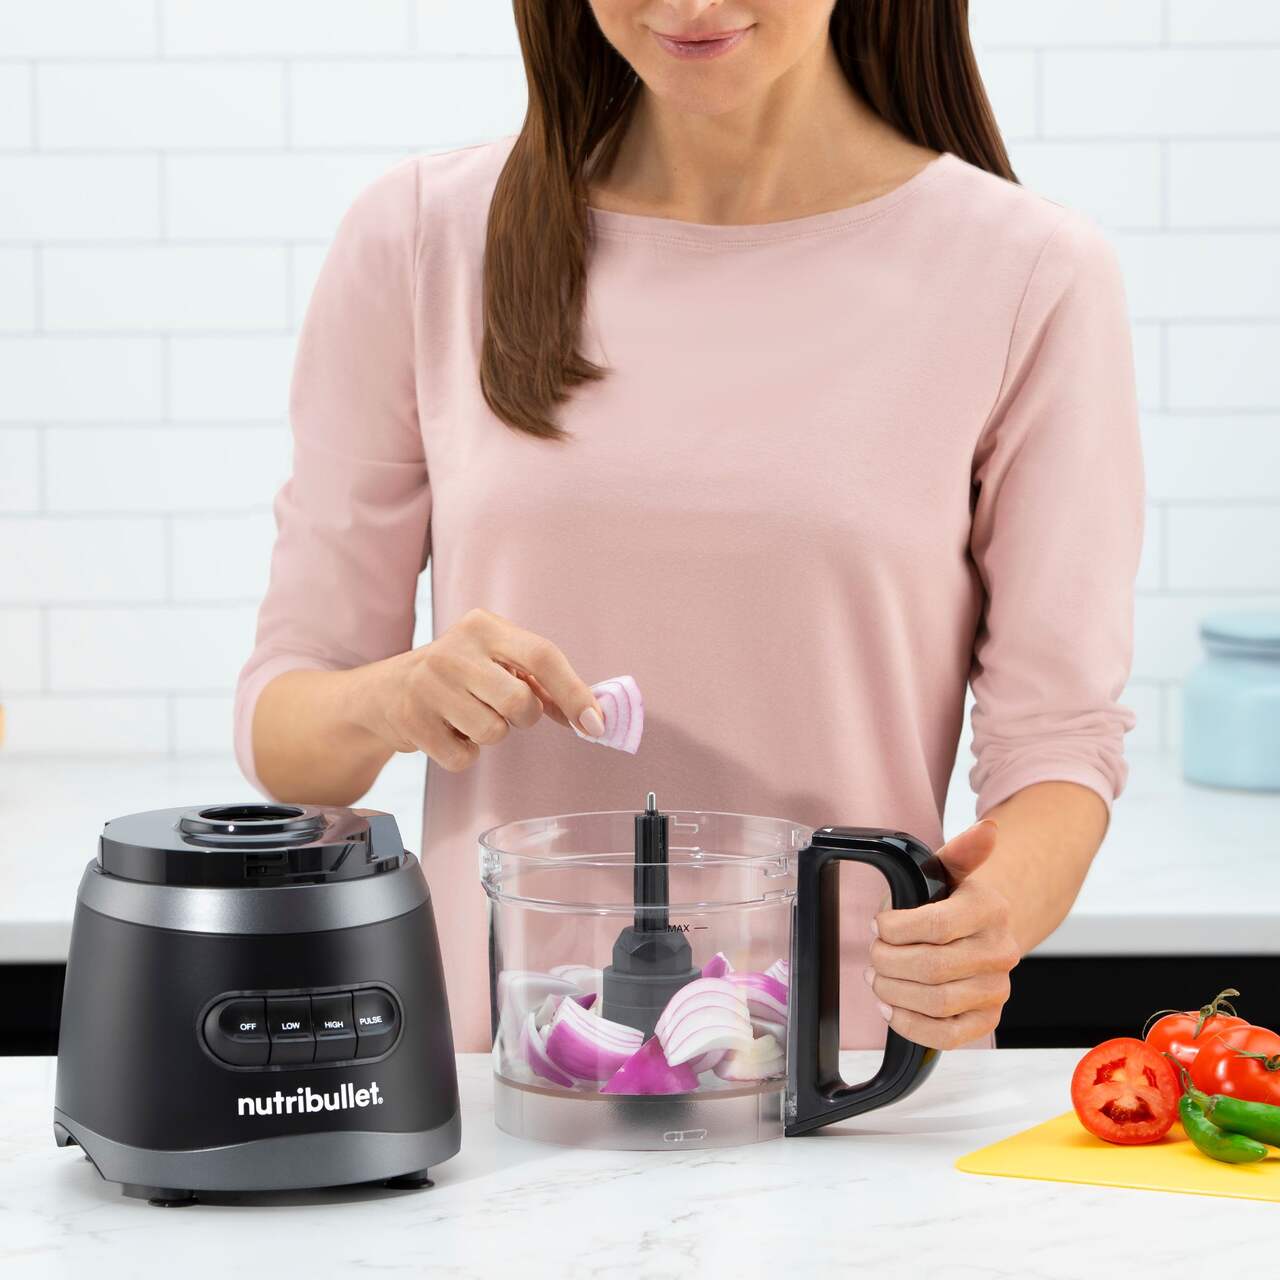 https://media-www.canadiantire.ca/product/living/kitchen/kitchen-appliances/0430107/nutribullet-food-processor-7-cup-ce52e7bf-6620-4753-80fd-01aa751d3b2f-jpgrendition.jpg?imdensity=1&imwidth=1244&impolicy=mZoom